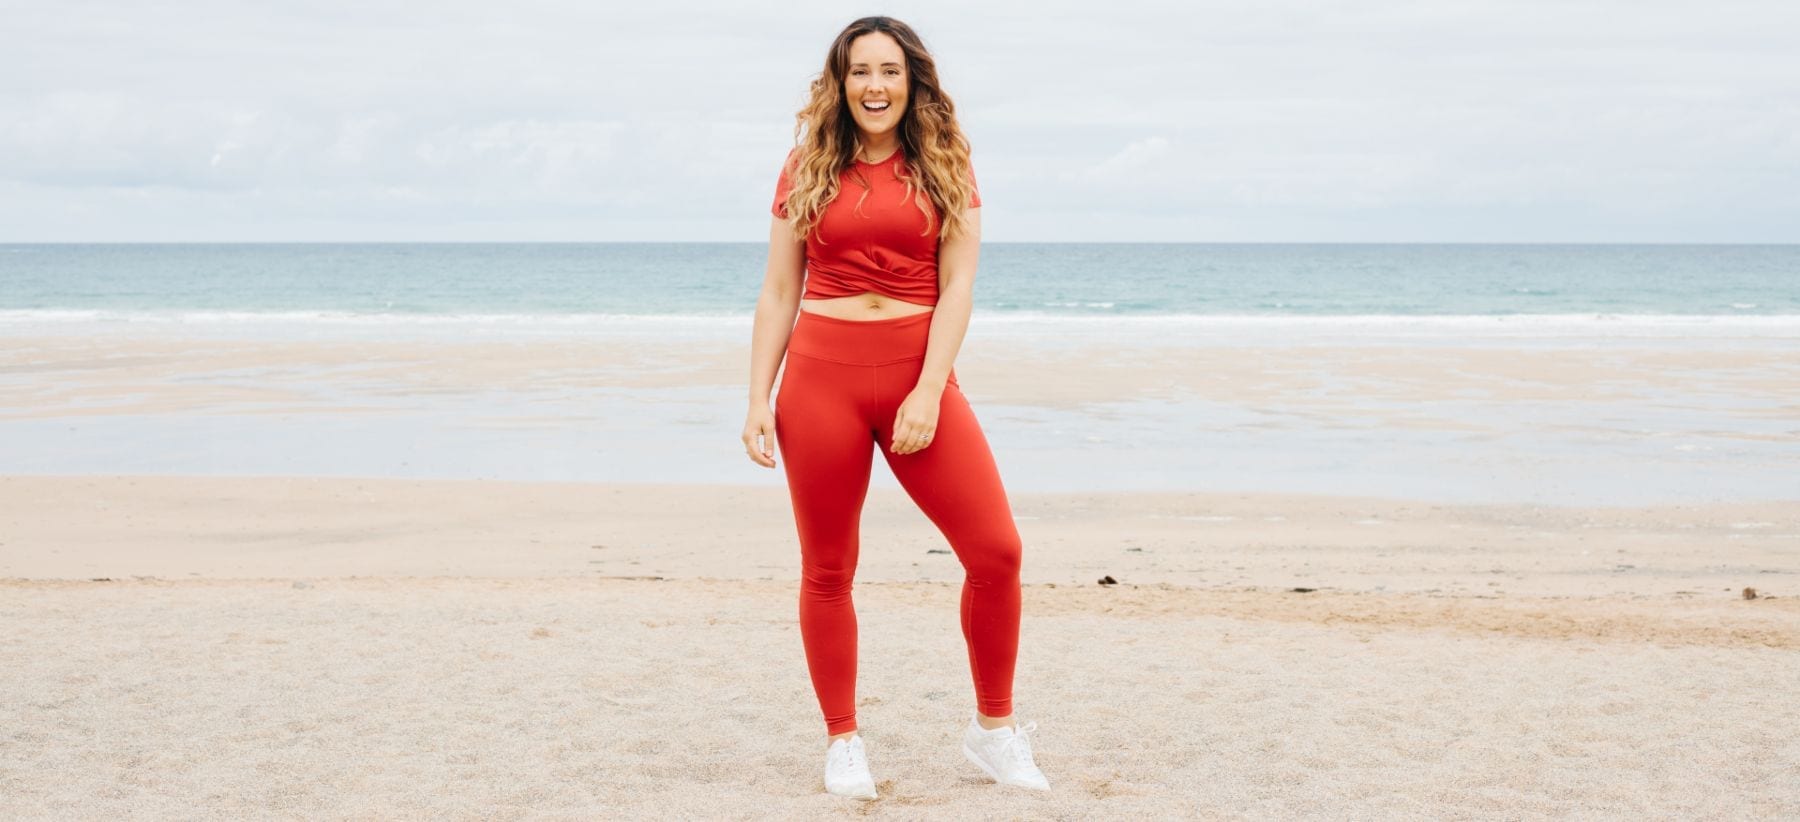 Corinne Evans On Self-Love, Body Confidence & Becoming A Mum